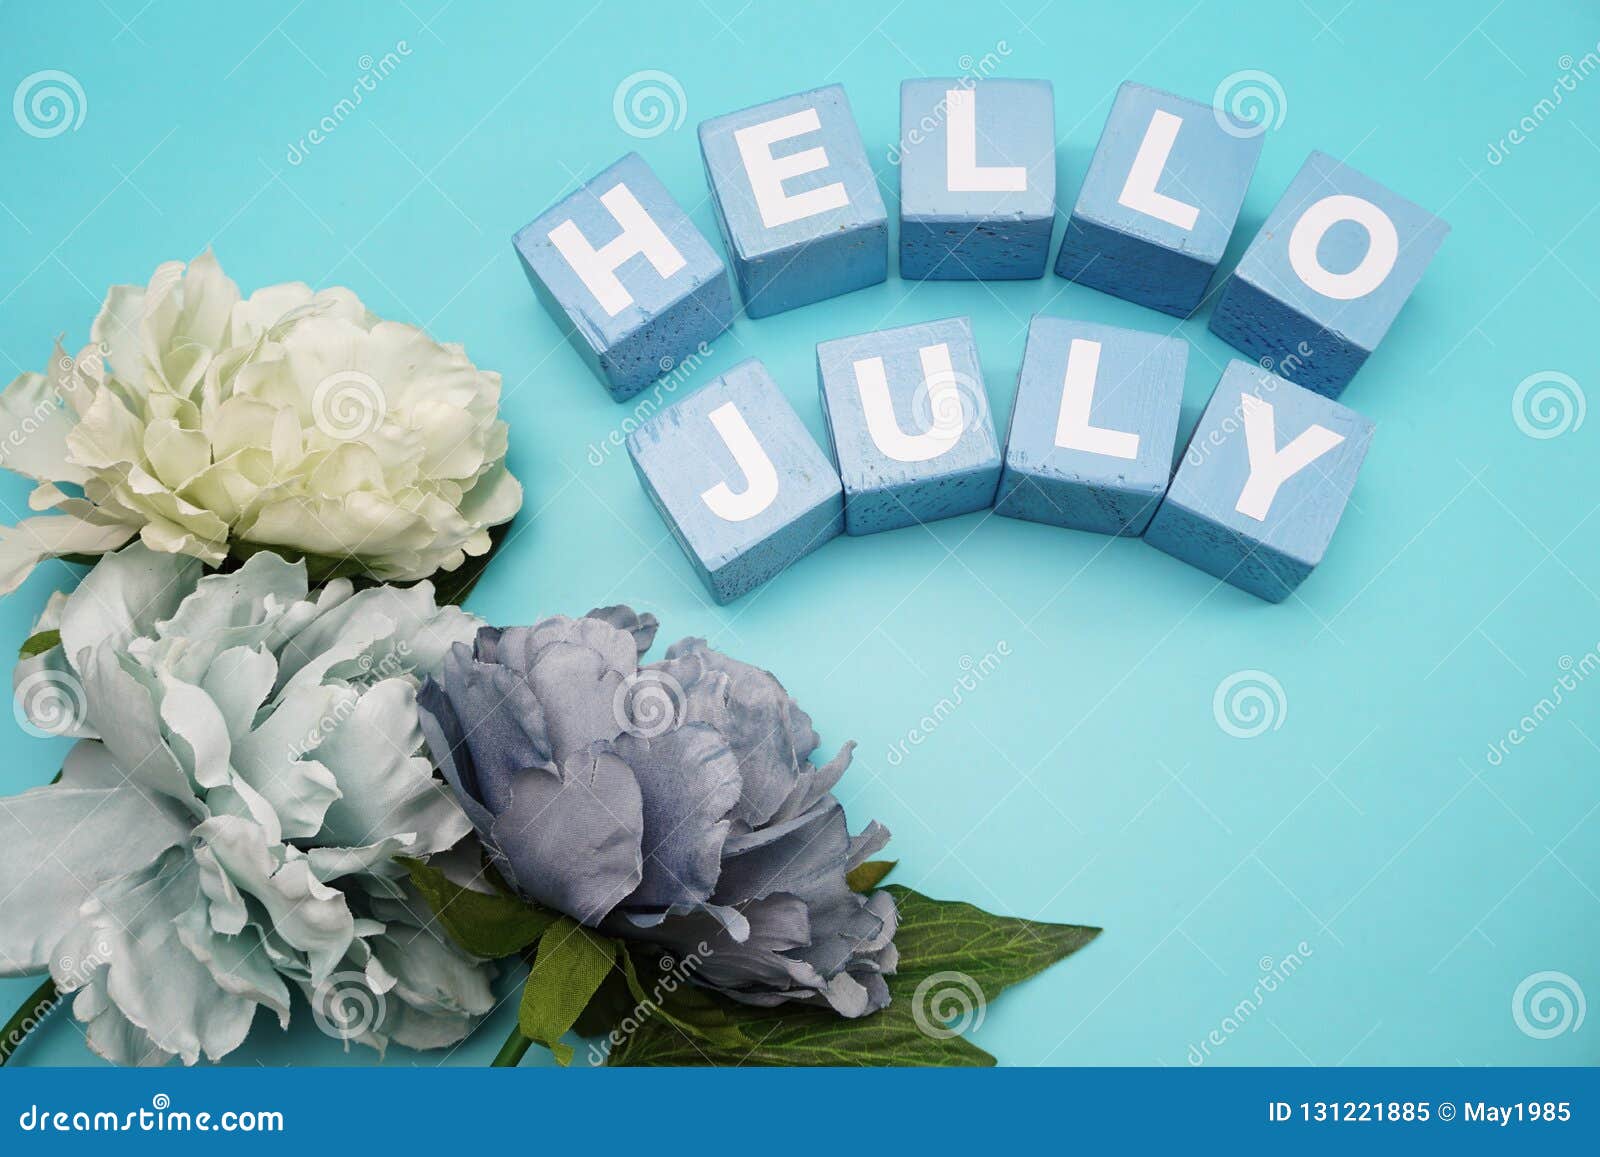 Hello July With Artificial Peony Flower On Blue Background Stock Image Image Of Design Monthly 131221885